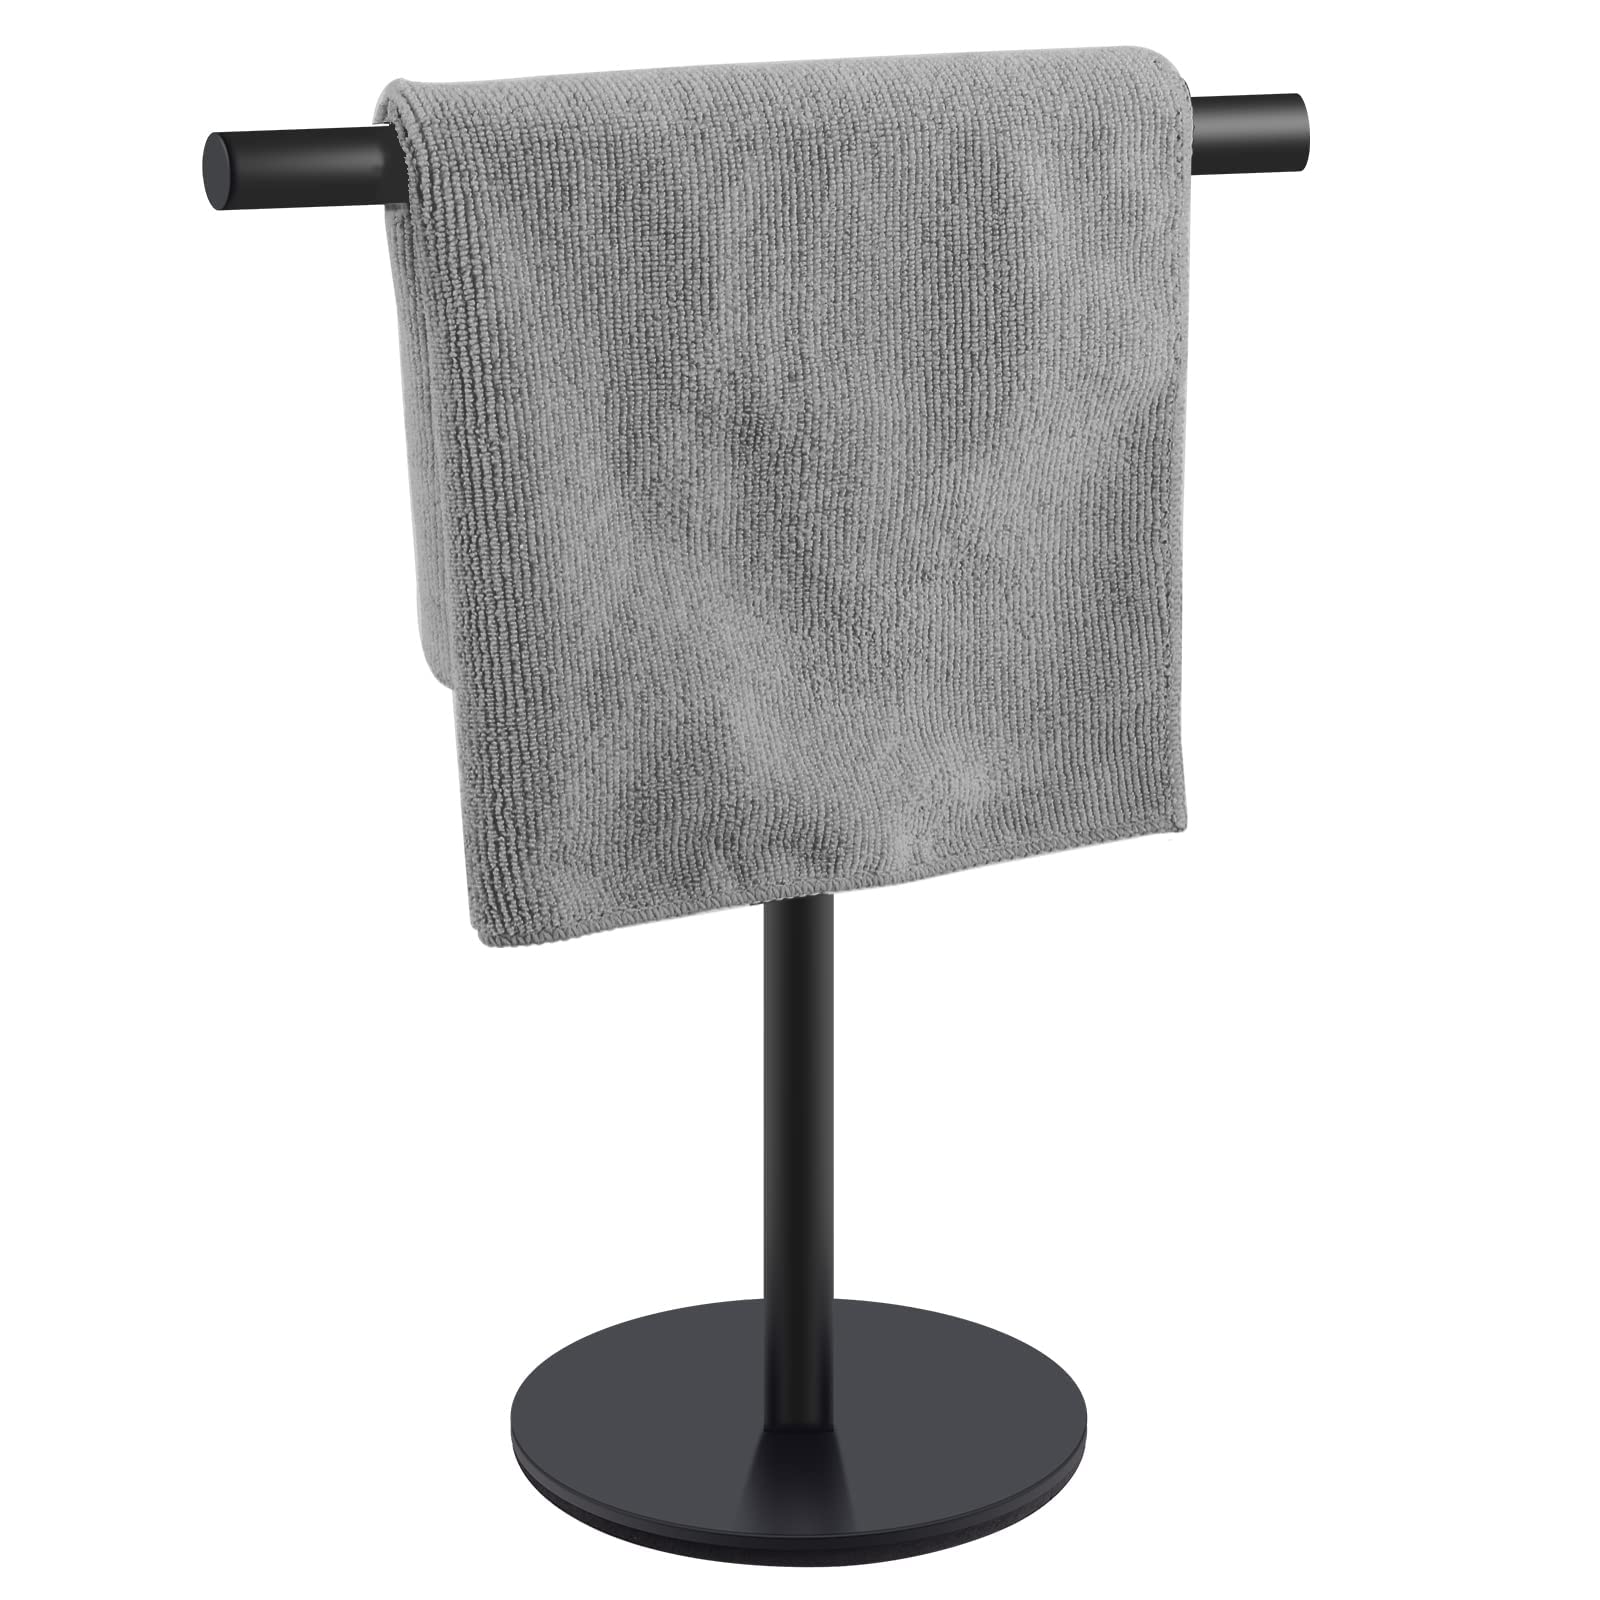 Mutclord T-Shape Hand Towel Holder - Free Standing Hand Towel Rack for Bathroom or Kitchen Countertops, with SUS304 Stainless Steel Matte Black Finish, Minimalist Style